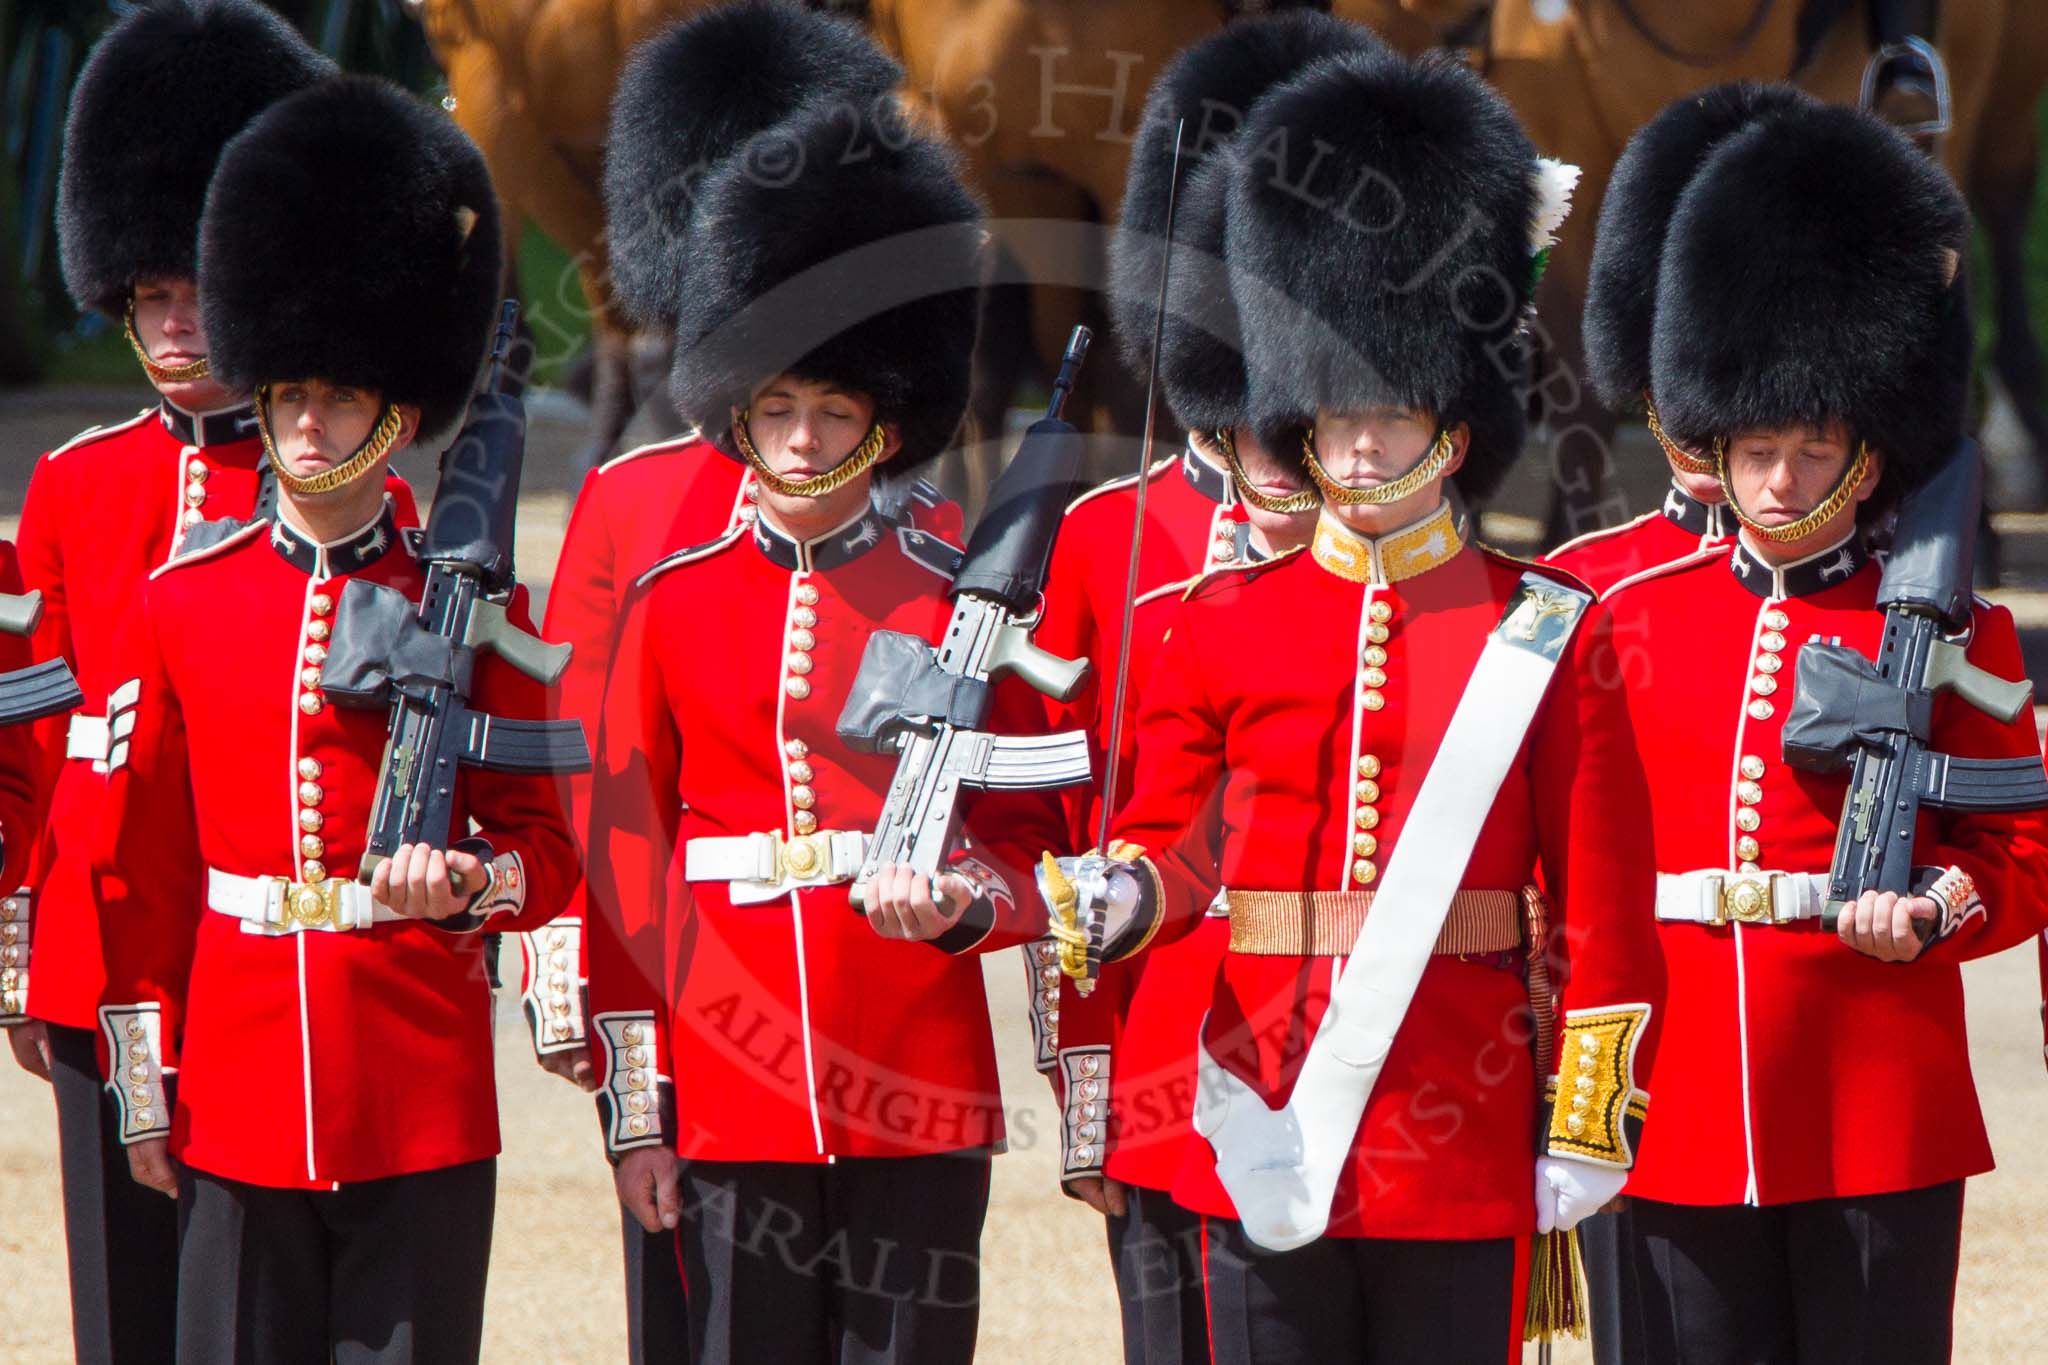 The Colonel's Review 2013: No. 1 Guard (Escort for the Colour),1st Battalion Welsh Guards, with the Ensign,Second Lieutenant Joel Dinwiddle..
Horse Guards Parade, Westminster,
London SW1,

United Kingdom,
on 08 June 2013 at 10:42, image #202